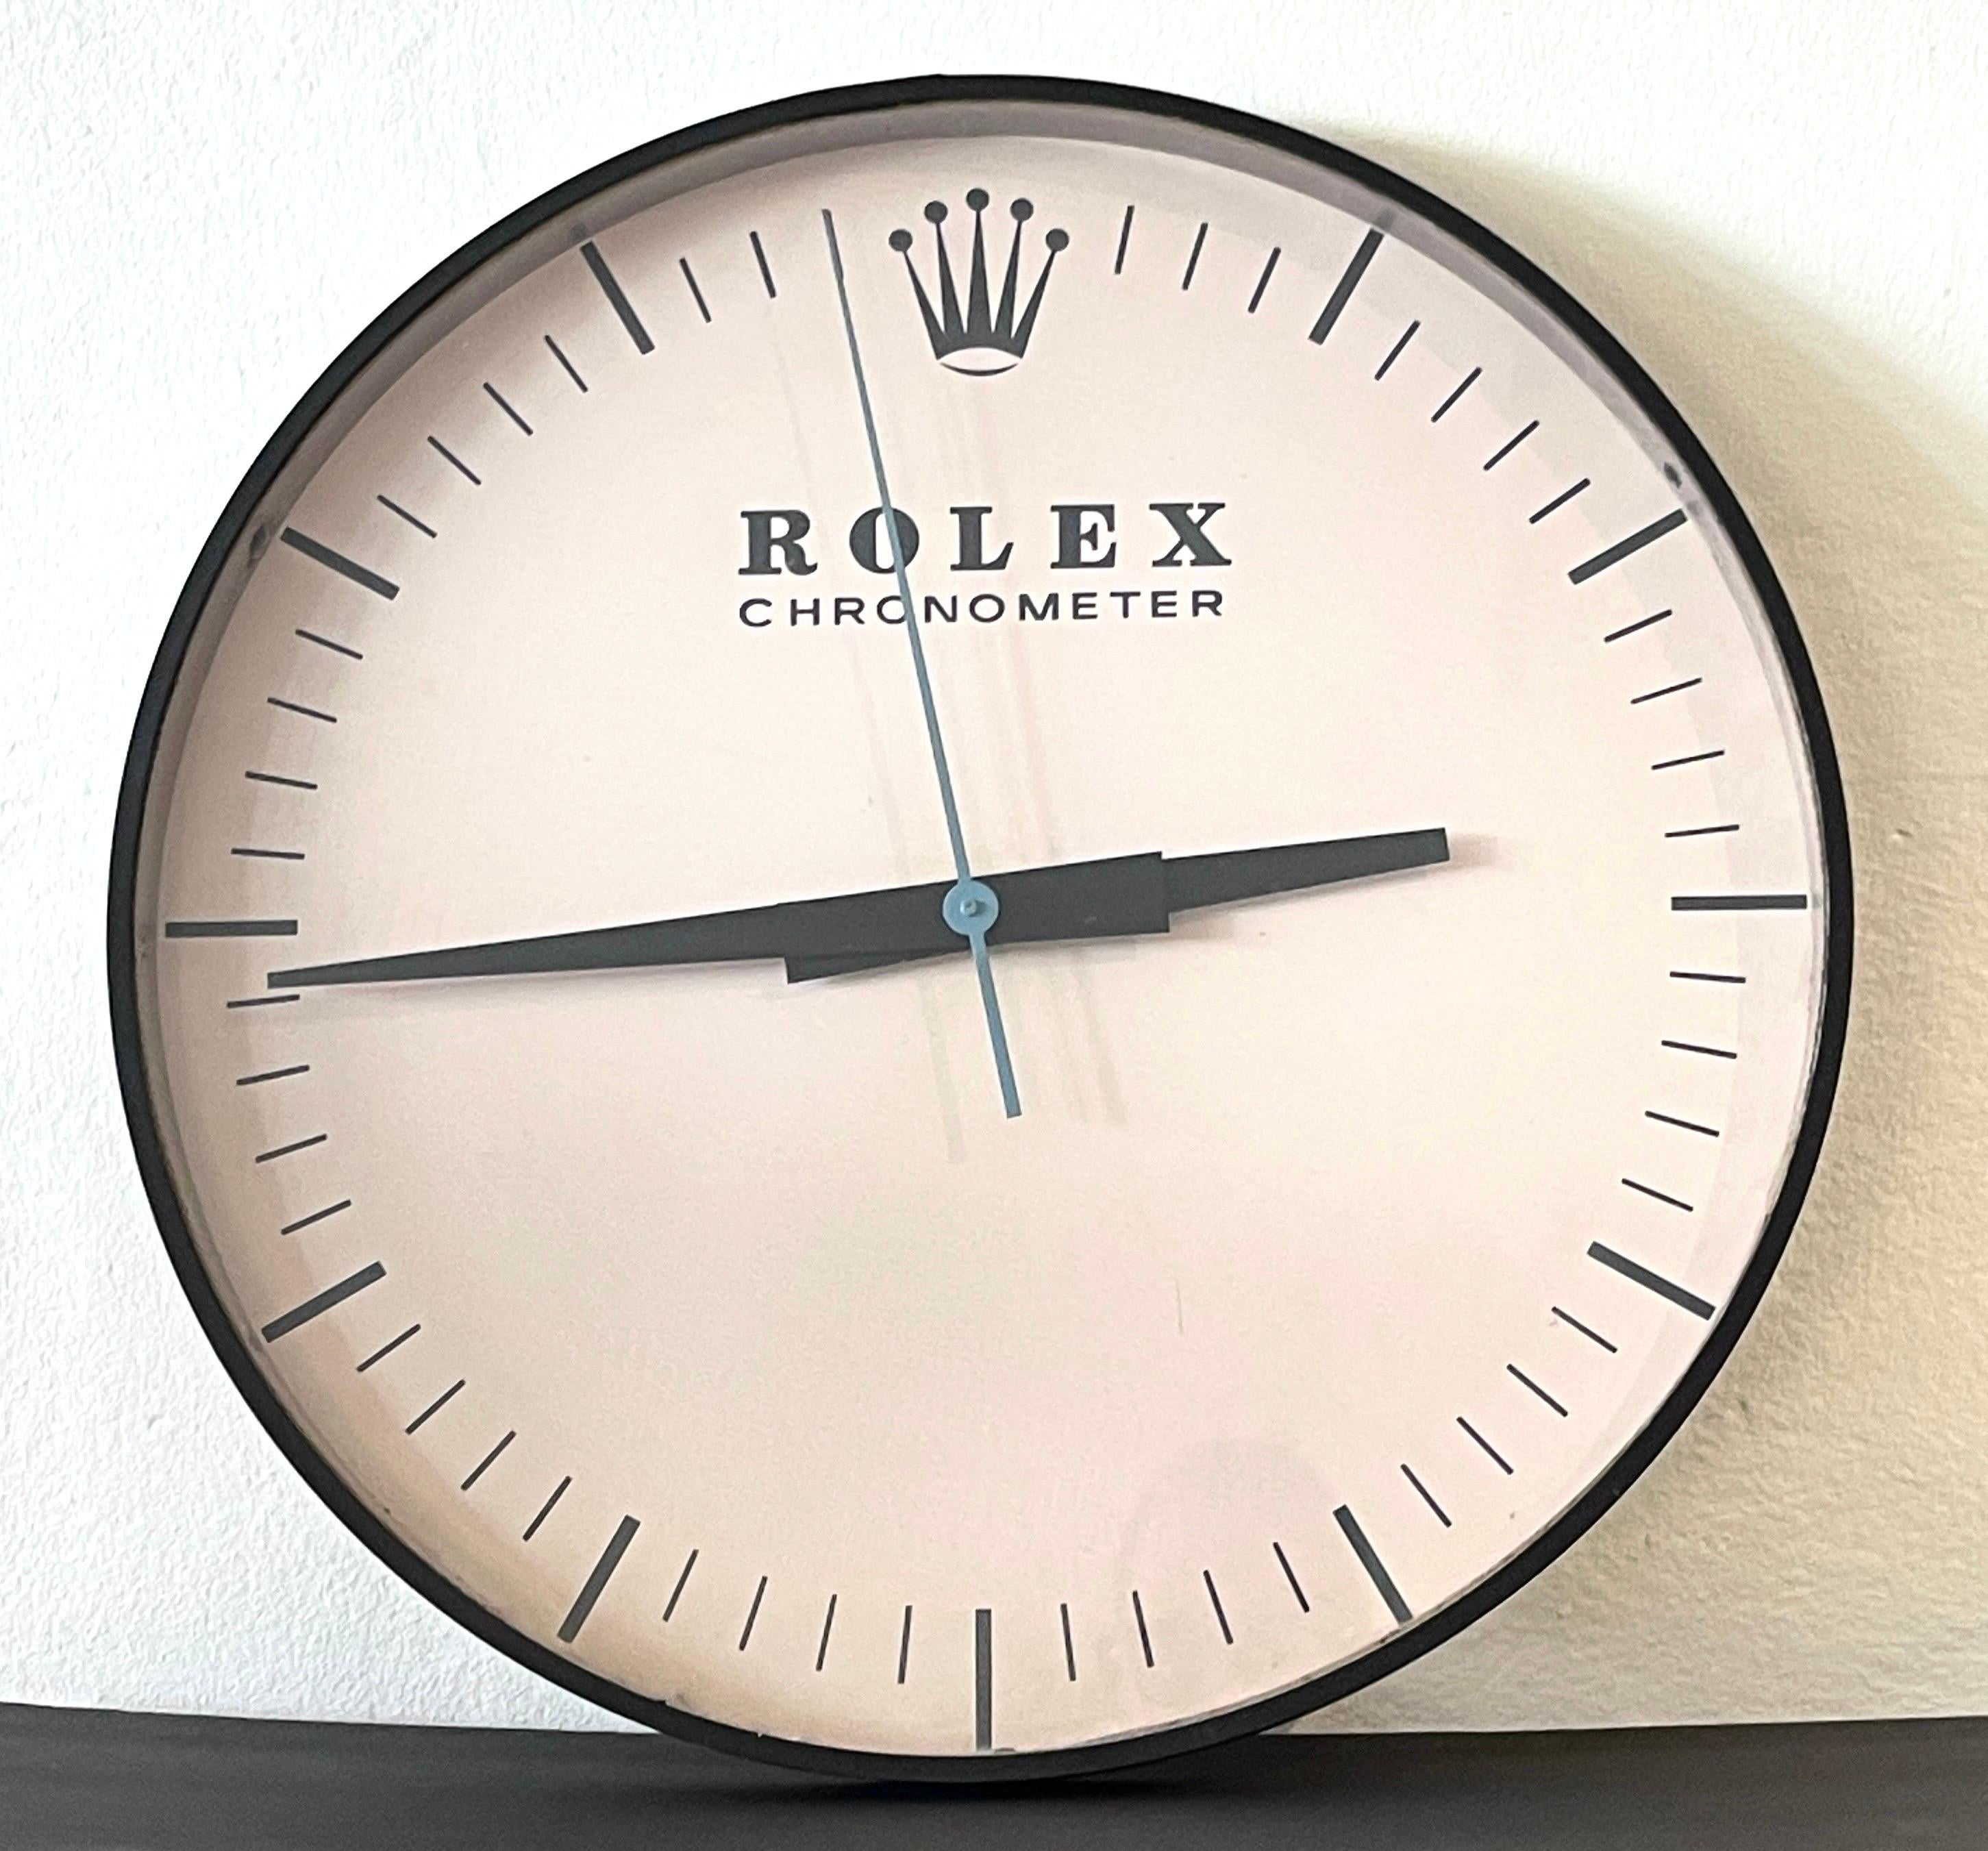 The Ohio Advertising Display for Rolex, Wall Clock
USA, circa 1965,  Inscribed 'Rolex Chronometer' 
A rare opportunity to acquire a large size clock, known as an ultimate trophy for the collector of Rolex ephemera. These scarce clocks were made for